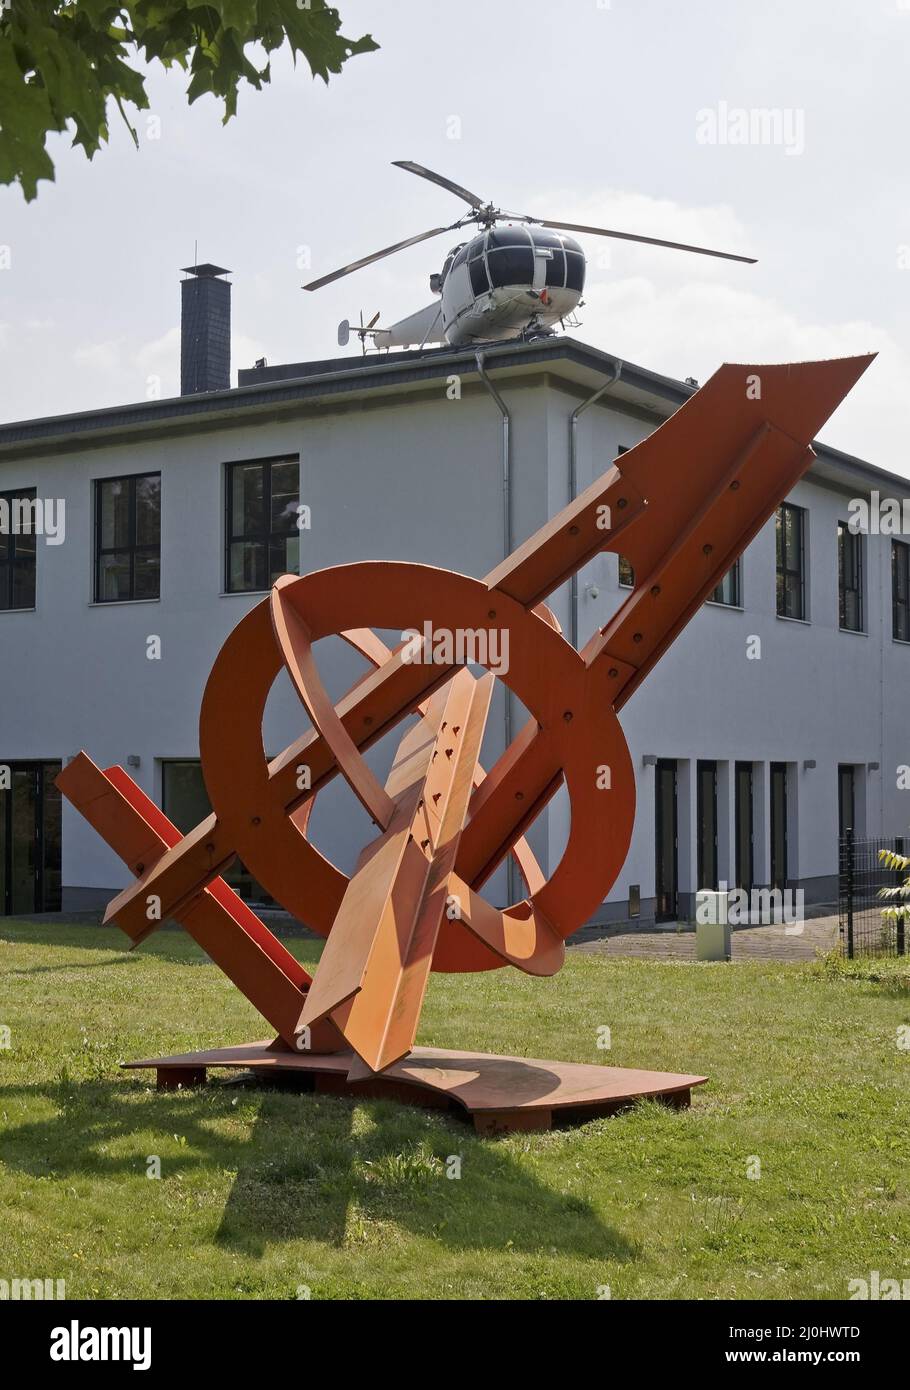 Artwork by Mark di Suvero in front and the helicopter by Michael Sailstorfer, sculpture park Cologne Stock Photo